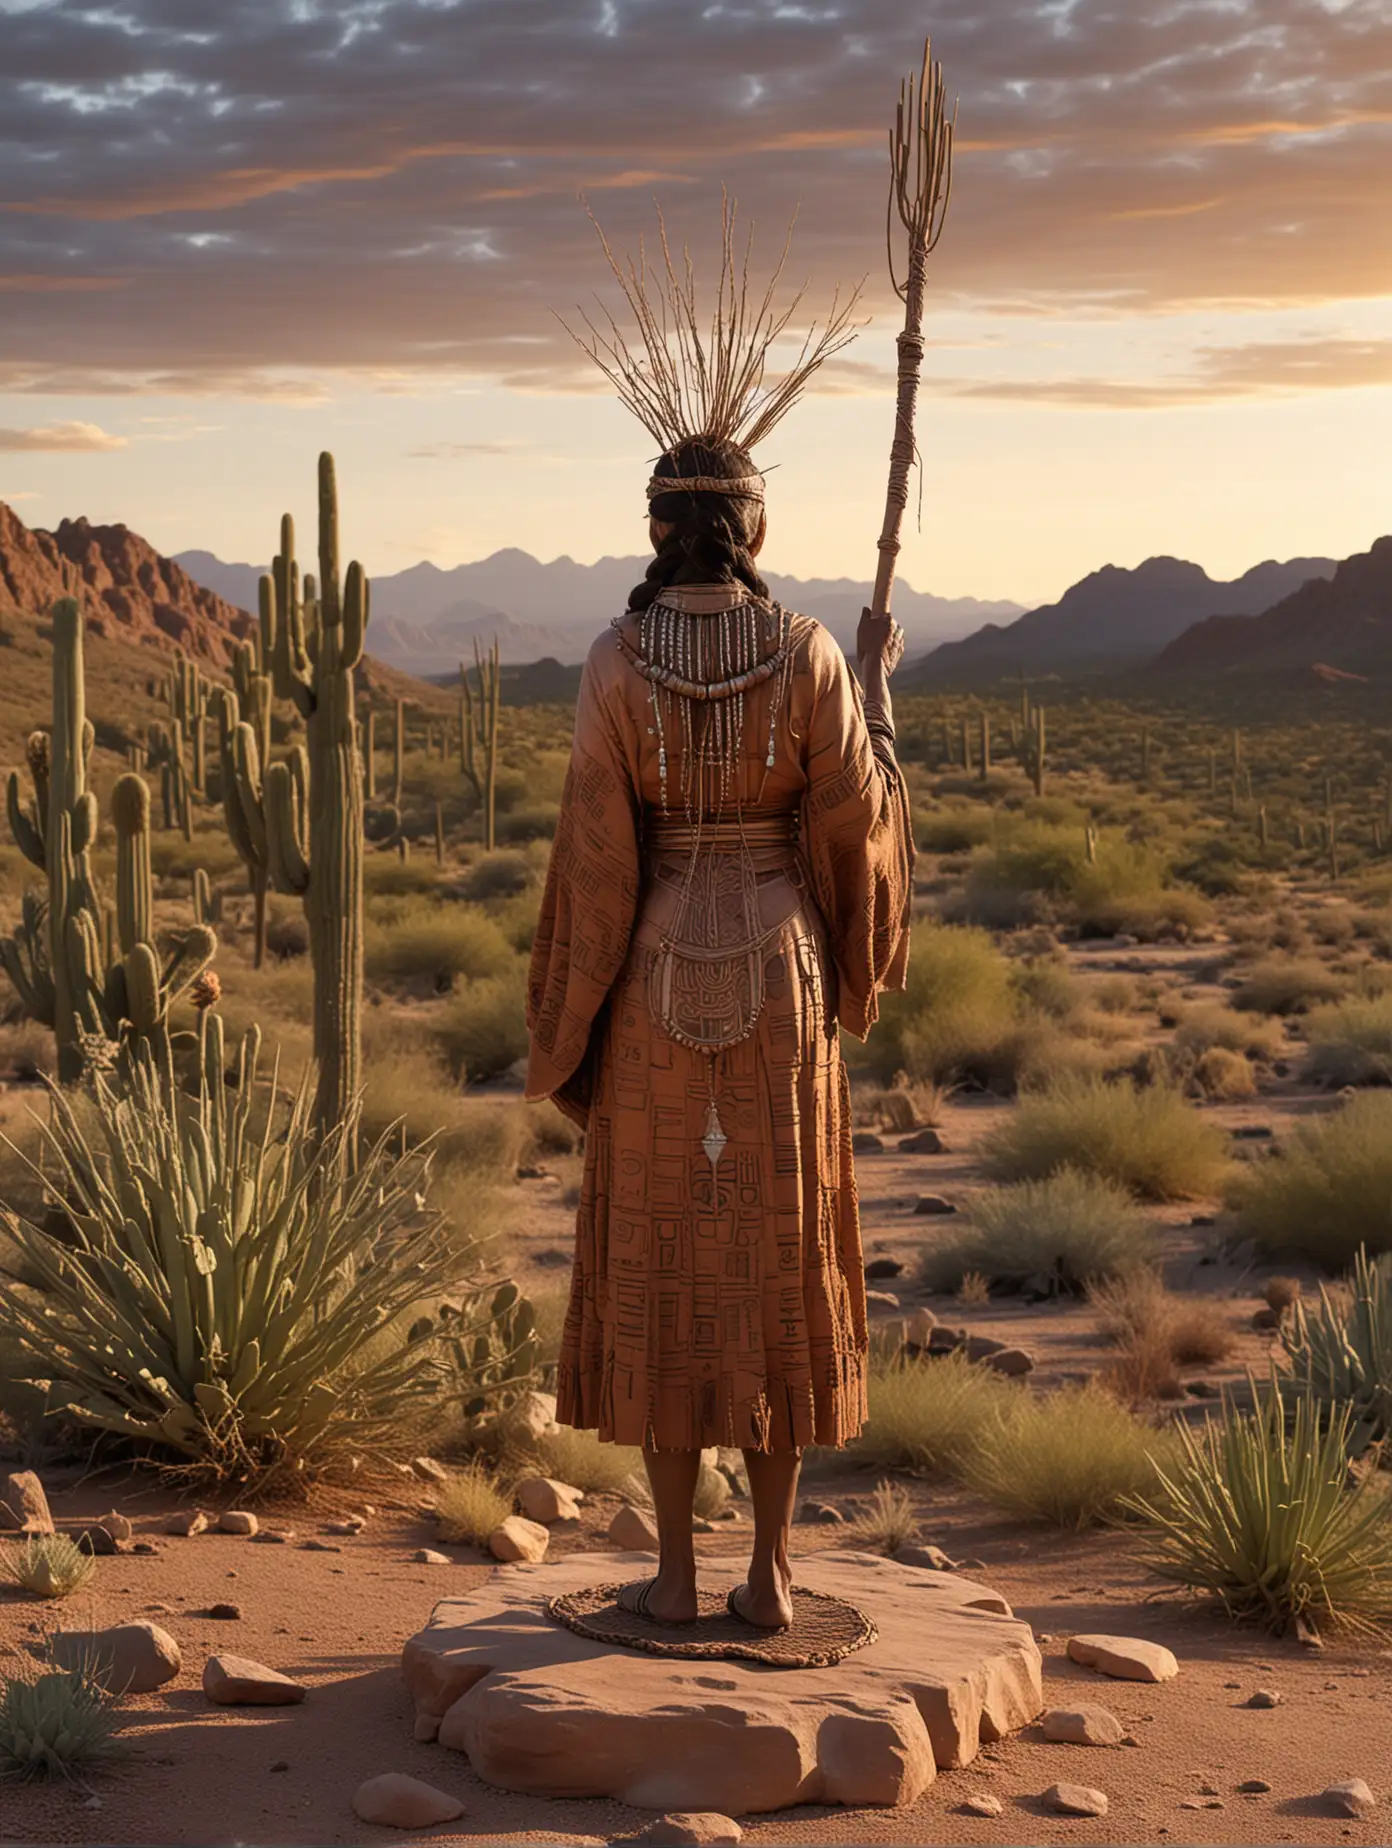 Create a towering figure on a huge pedestal of a Tohono O'odham woman elder made from copper or bronze, holding a traditional basket and staff, overlooking the Sonoran Desert. Please add a lighting element that can shine brightly in the Arizona desert. Create in a desert sunset.
Representation: Honors the Indigenous peoples of the region and symbolizes protection, wisdom, and the deep connection to the land.
Design Elements: The elder’s garments could be adorned with traditional patterns, and the base could be surrounded by native cacti and flora.